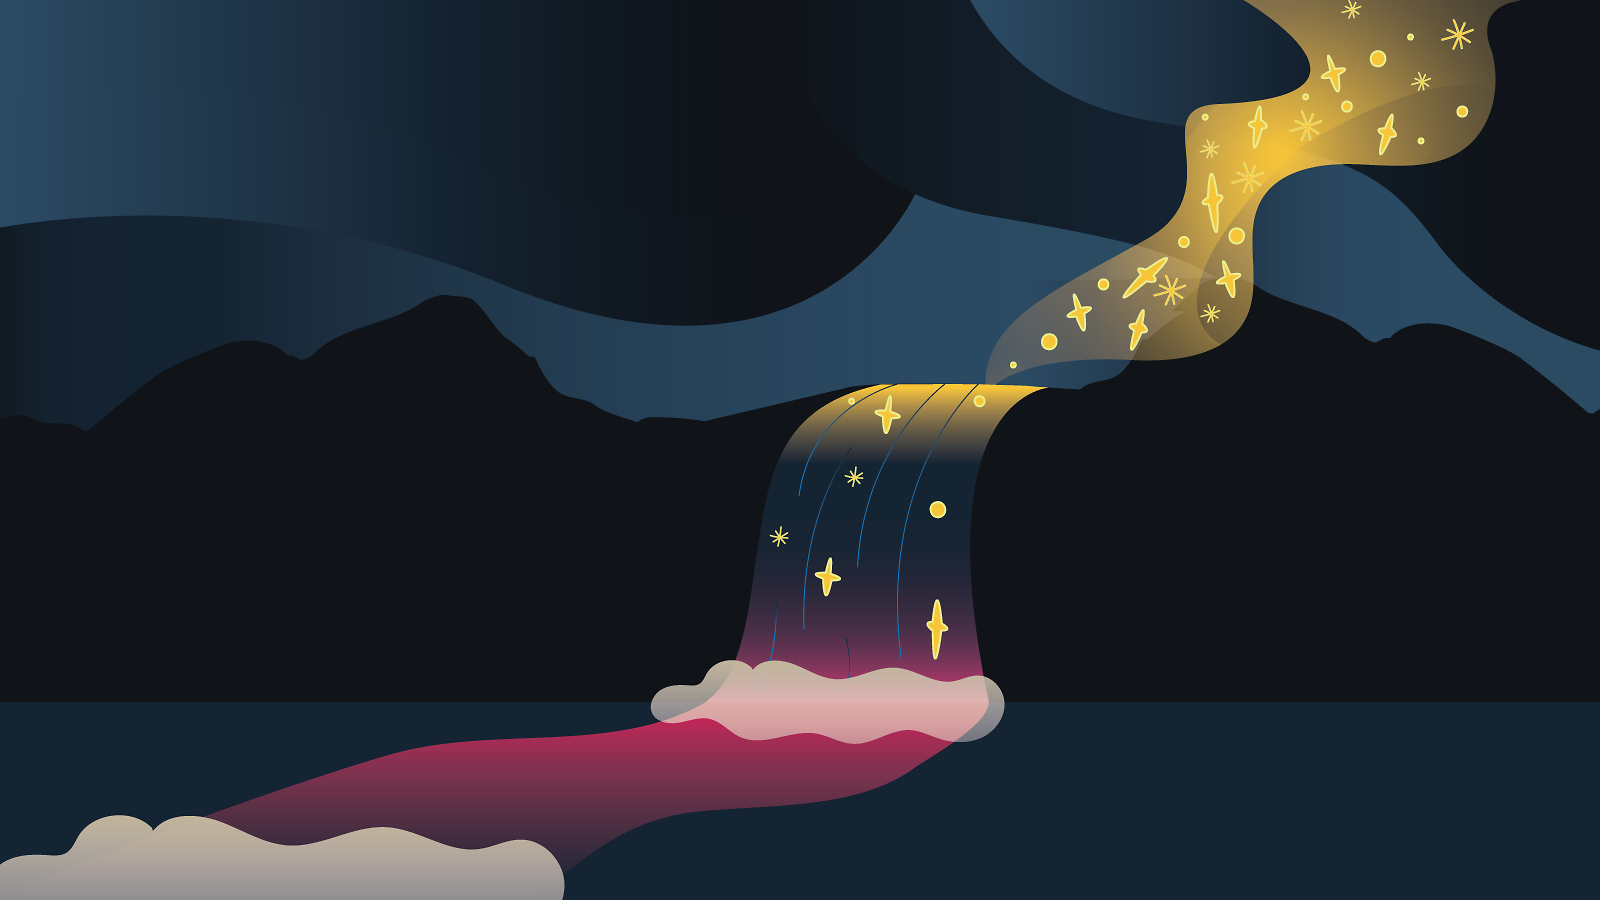 Illustration of river of stars in the sky flows into waterfall and river